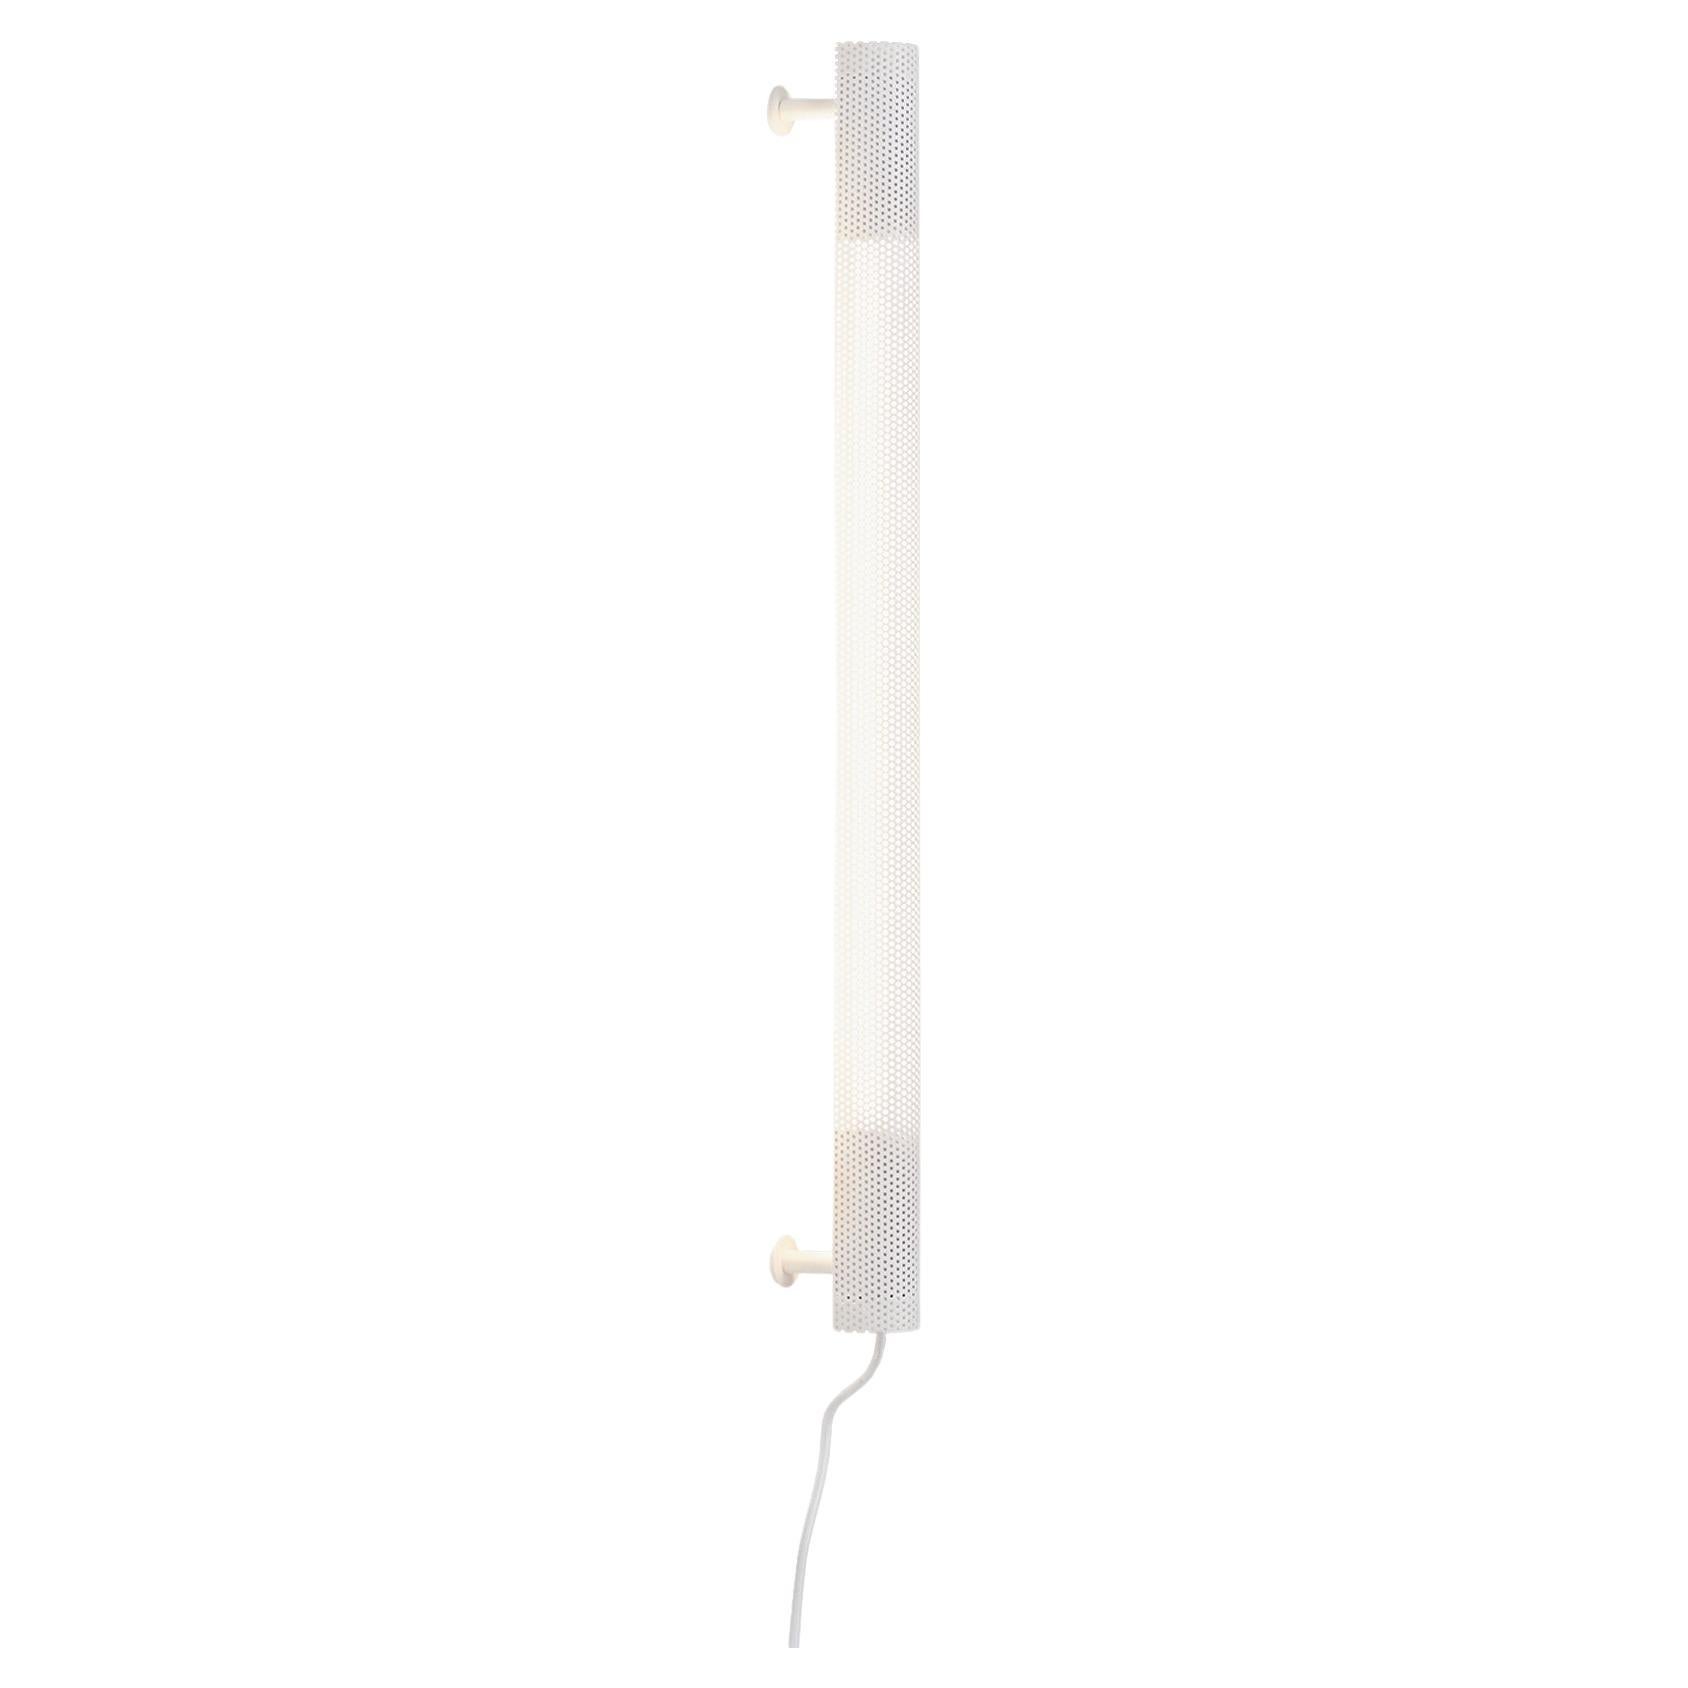 Radent Wall Lamp in White, by NUAD